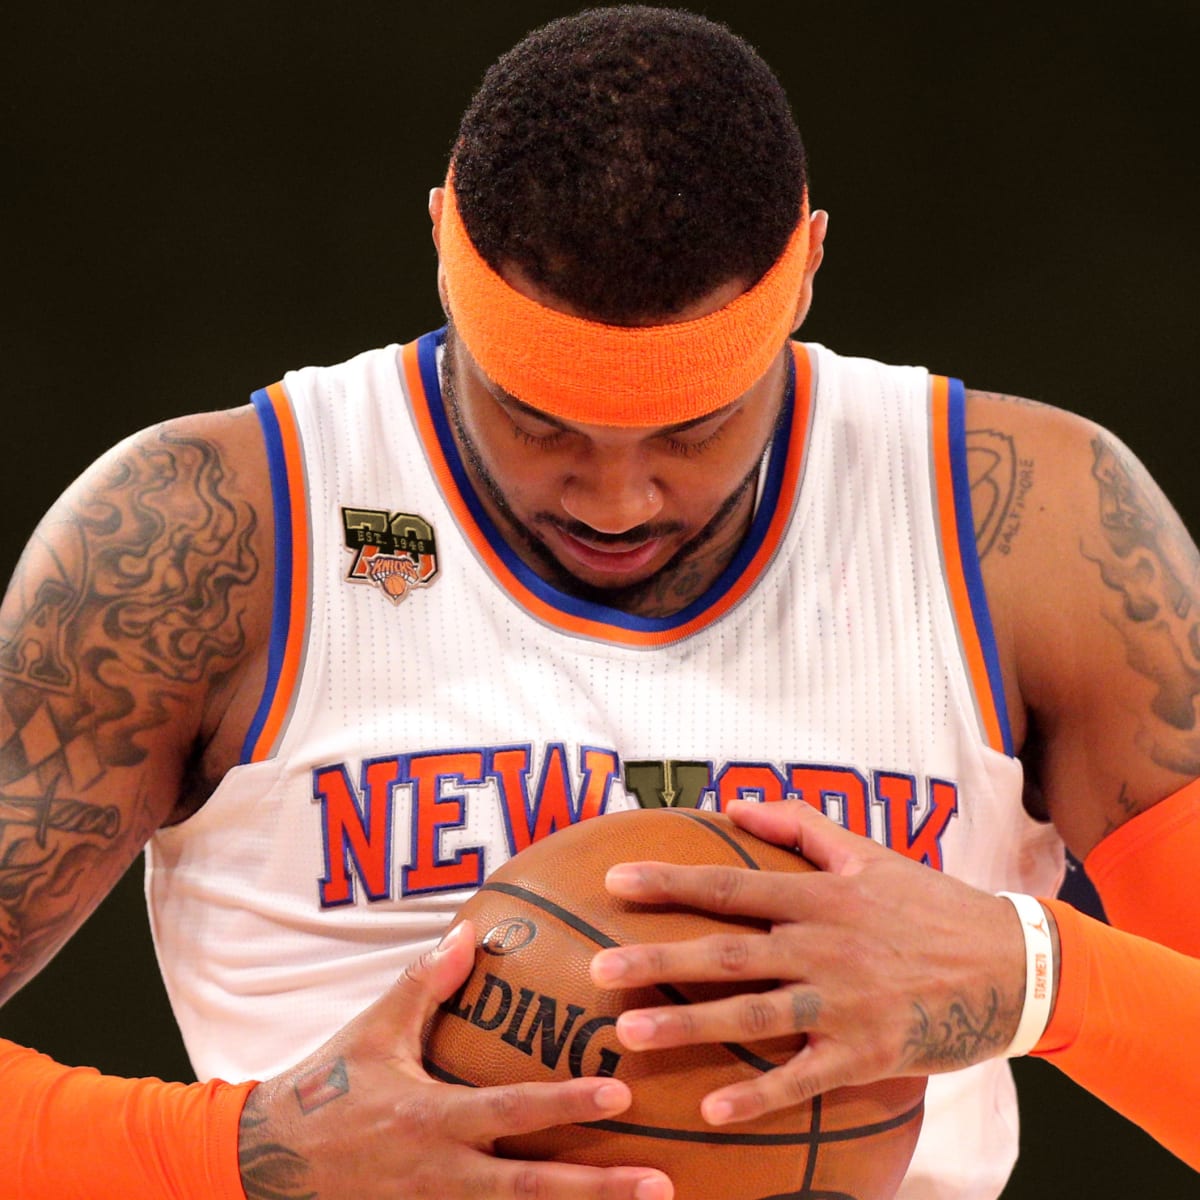 Carmelo Anthony revived basketball in Denver, laying foundation